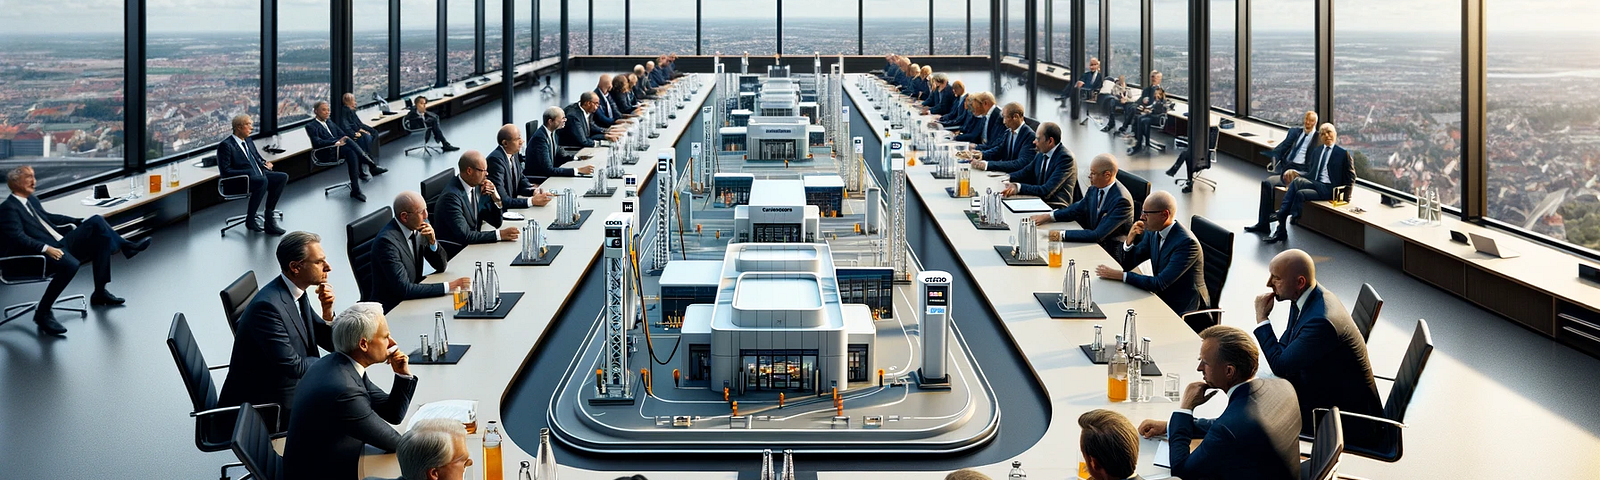 ChatGPT & DALL-E generated panoramic image of serious Germans wearing suits in a conference room, focusing on a scale model of a hydrogen refueling station